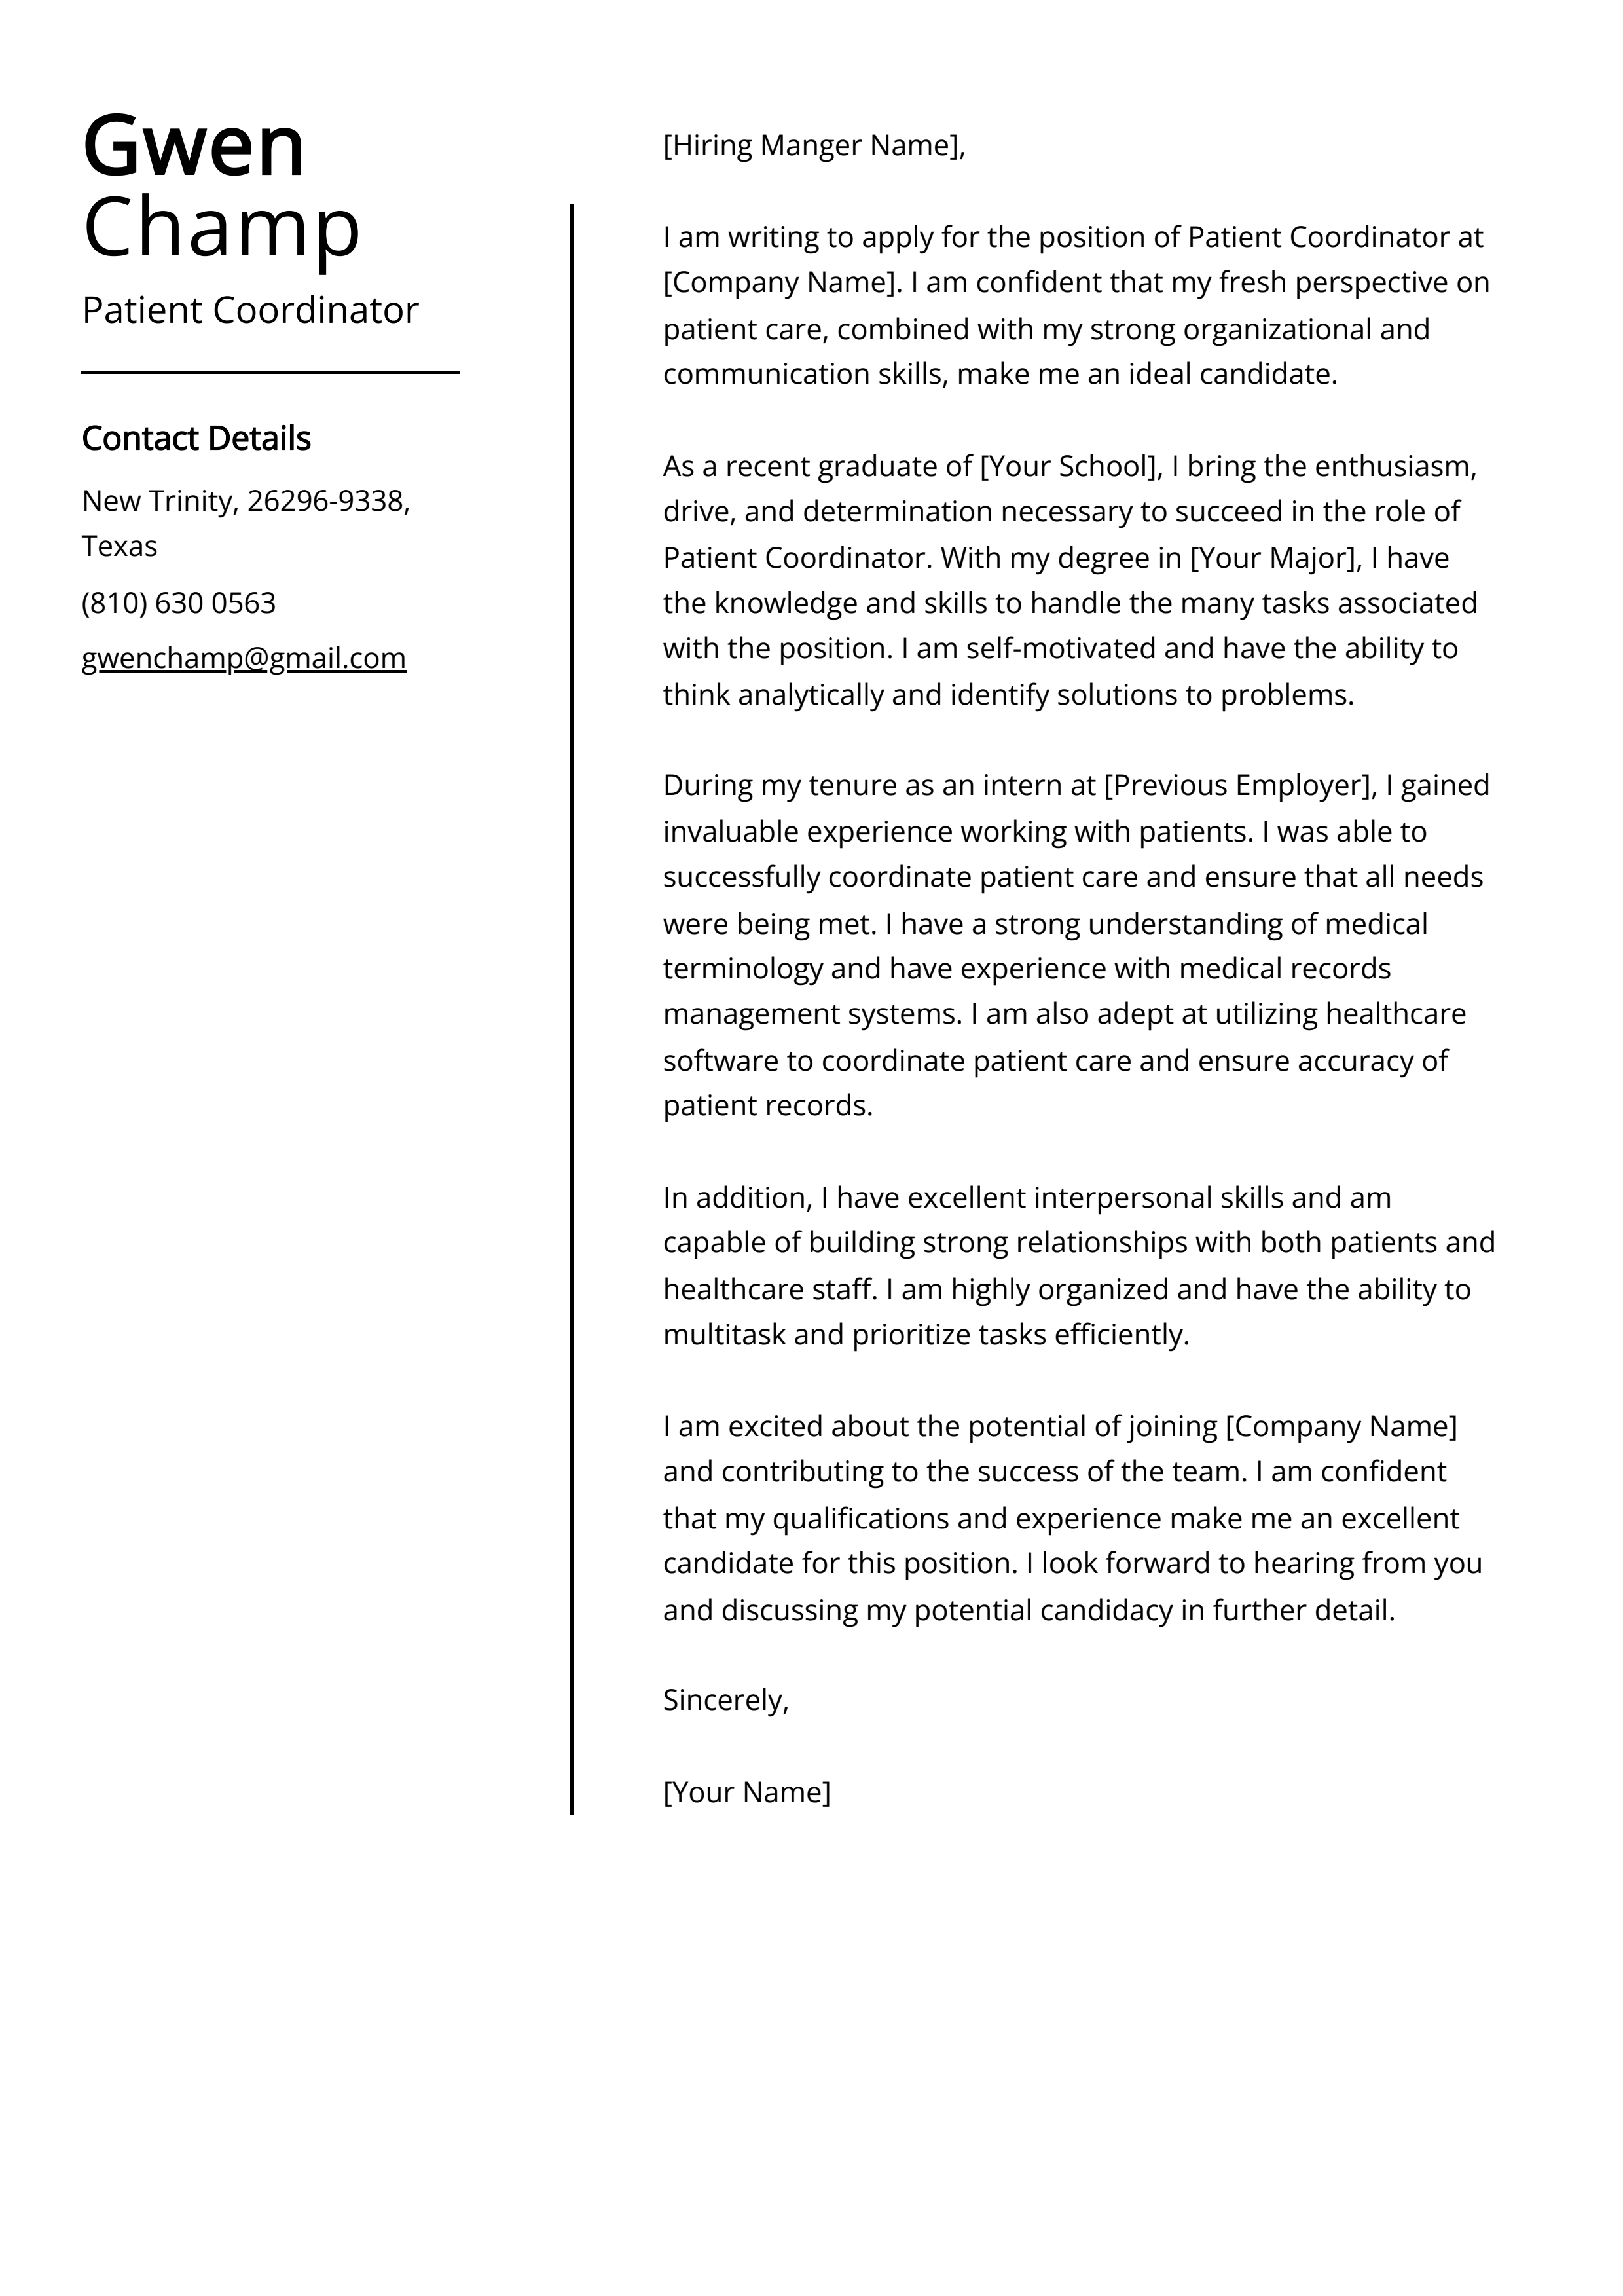 Patient Coordinator Cover Letter Example